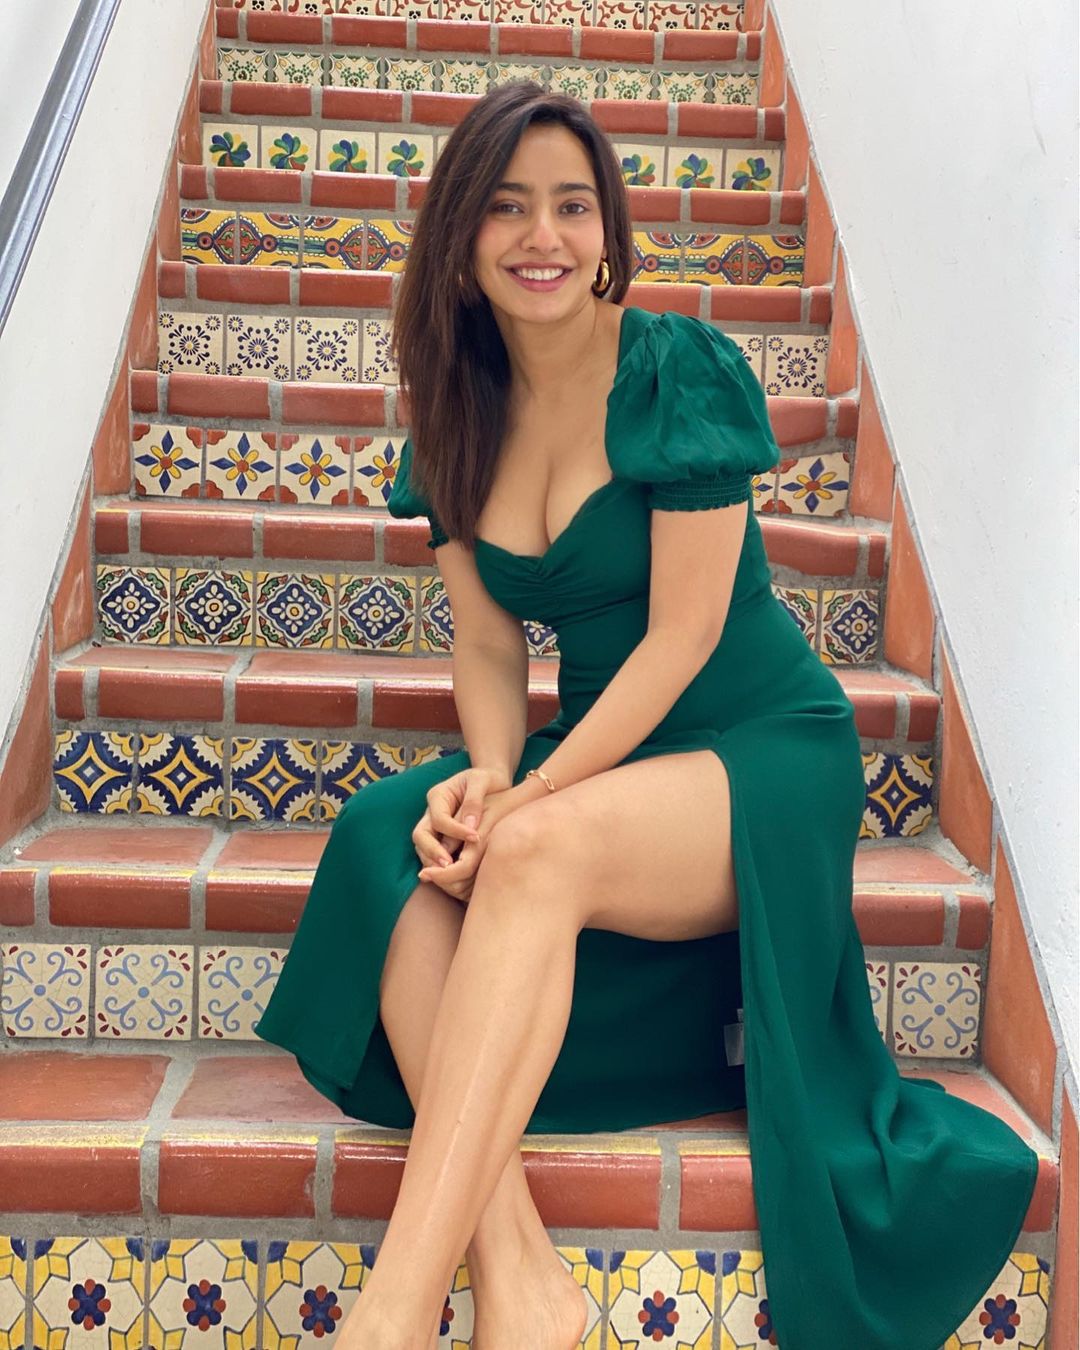 Neha Sharma looks sensational in the green dress with the plunging neckline and high slit